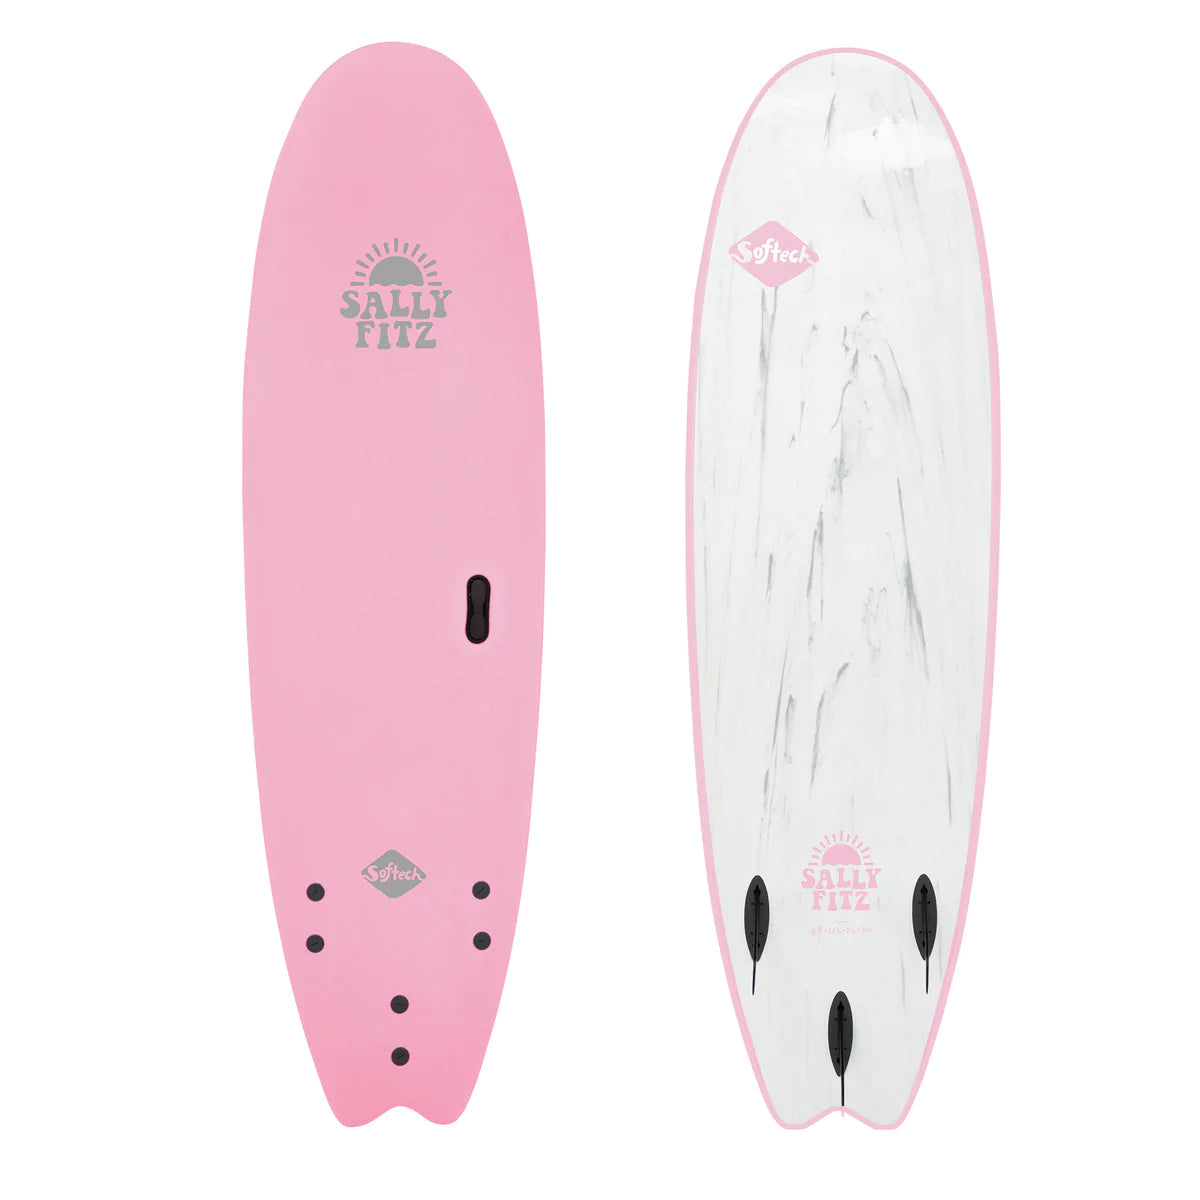 Softtech Sally Fitzgibbons Signature Surfboard - Pink-Softboards-troggs.com